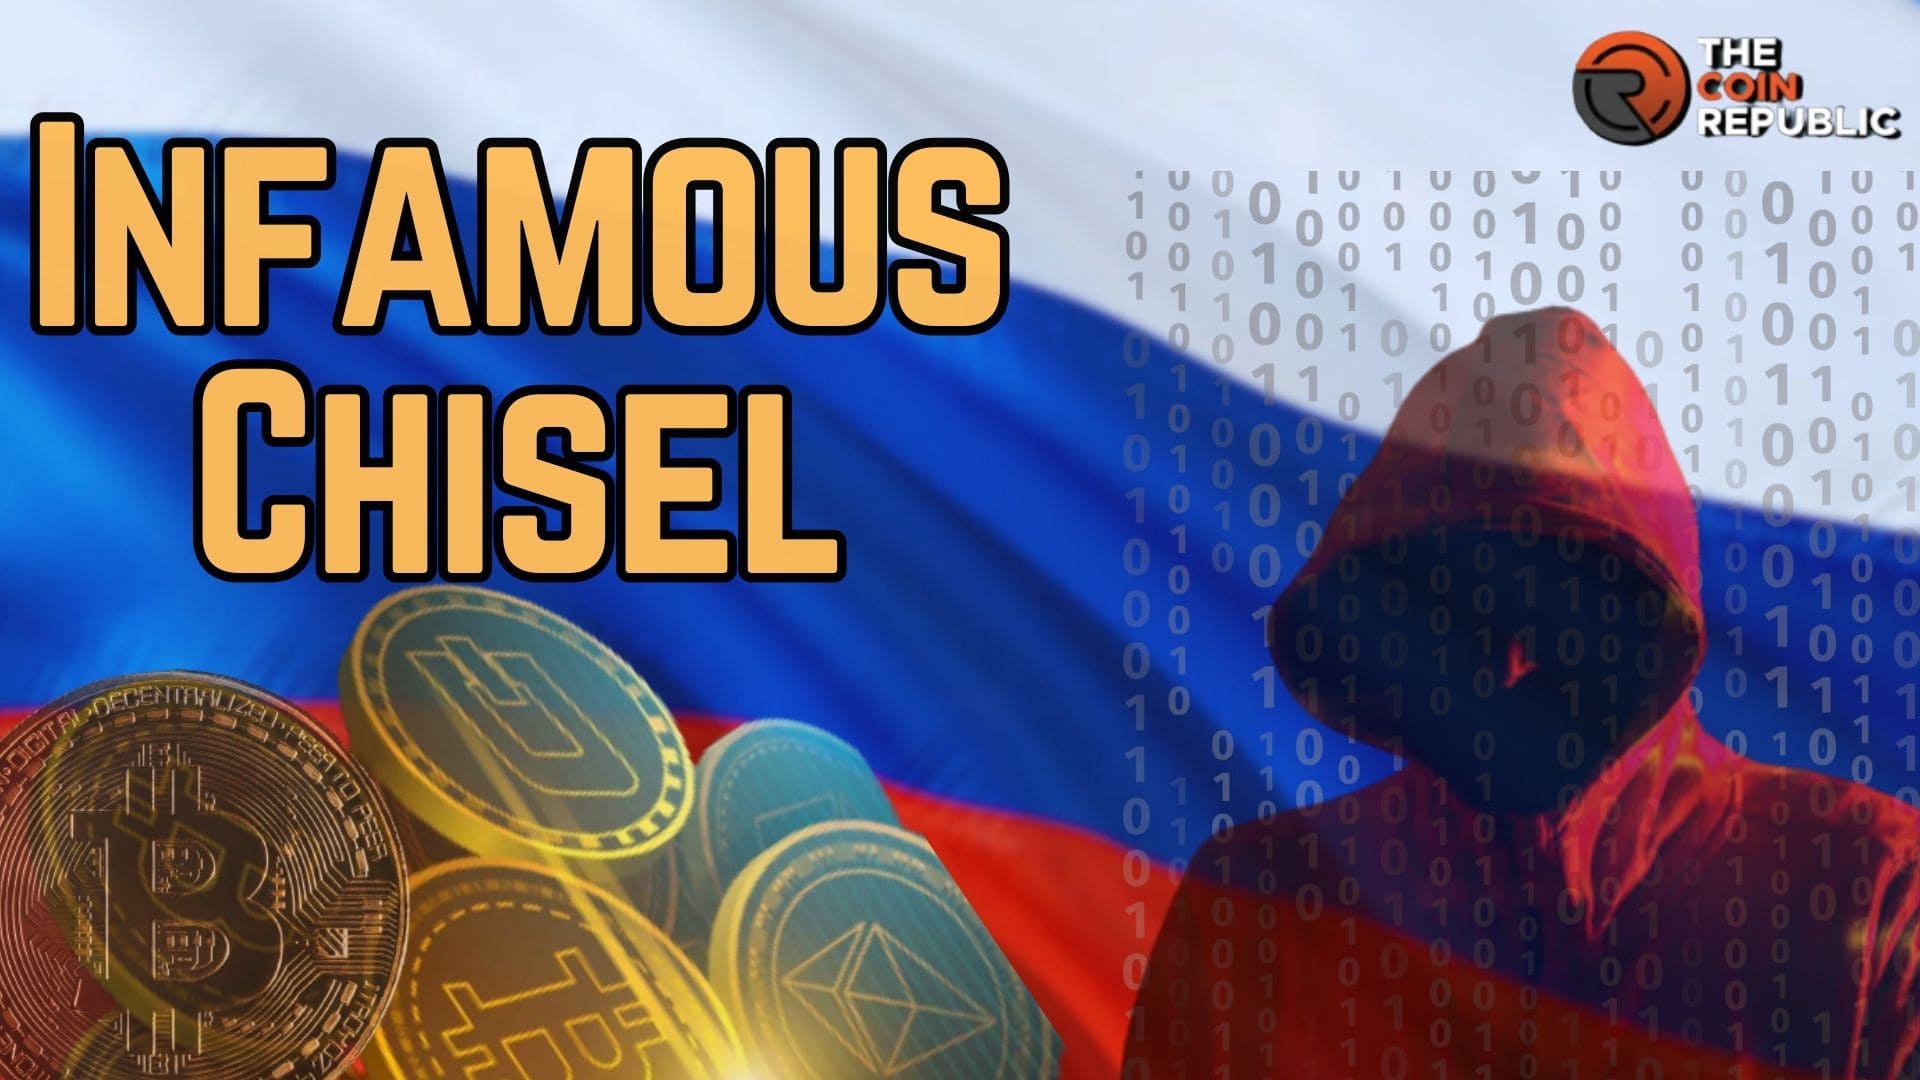 Russian-Origin Malware ‘Infamous Chisel’: Cryptocurrency Threat